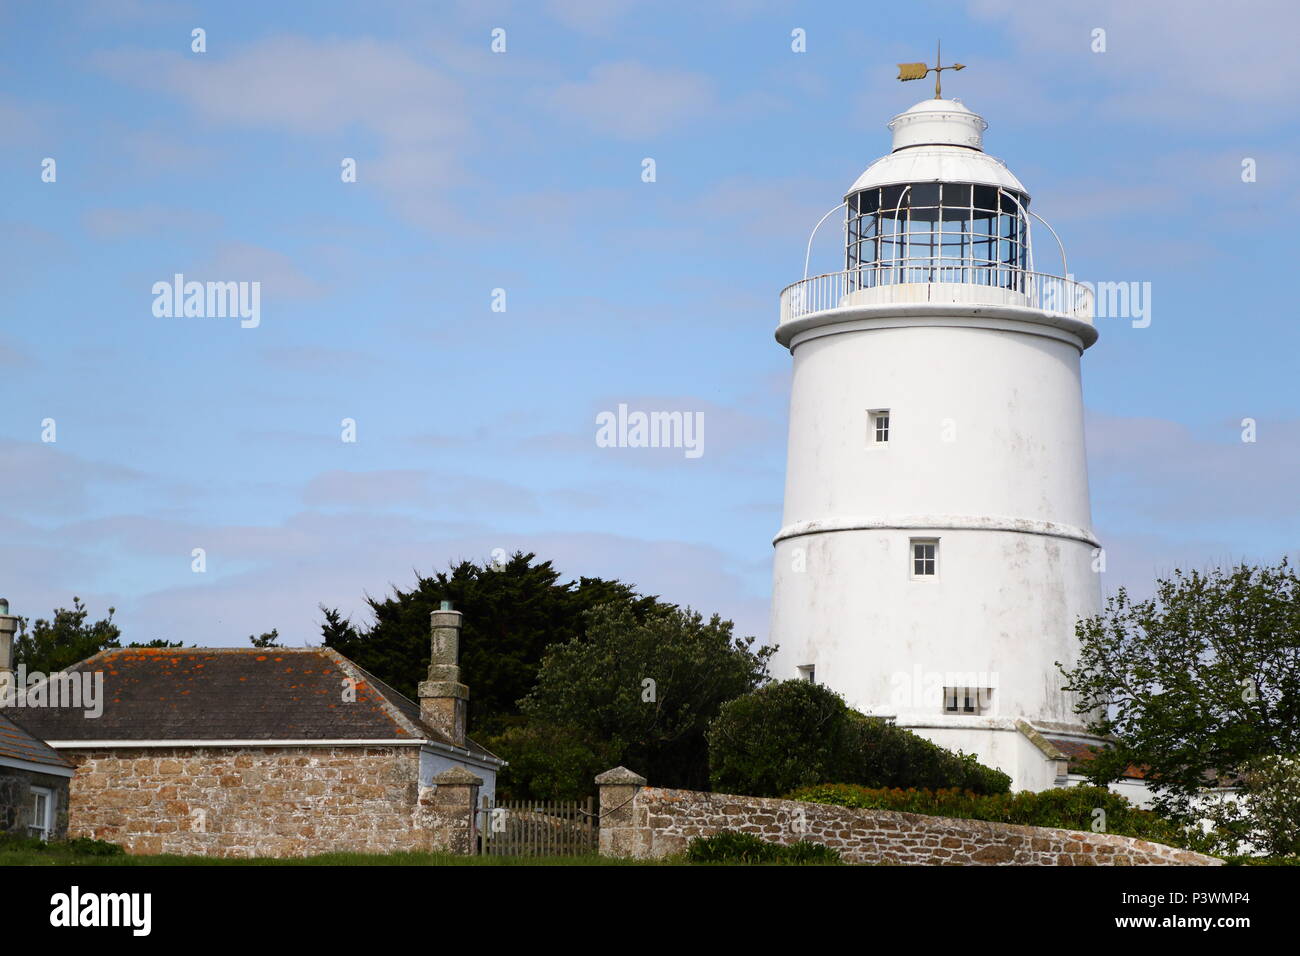 Lighthouse on St Agnes, Isles of Scilly, Cornwall, UK Stock Photo